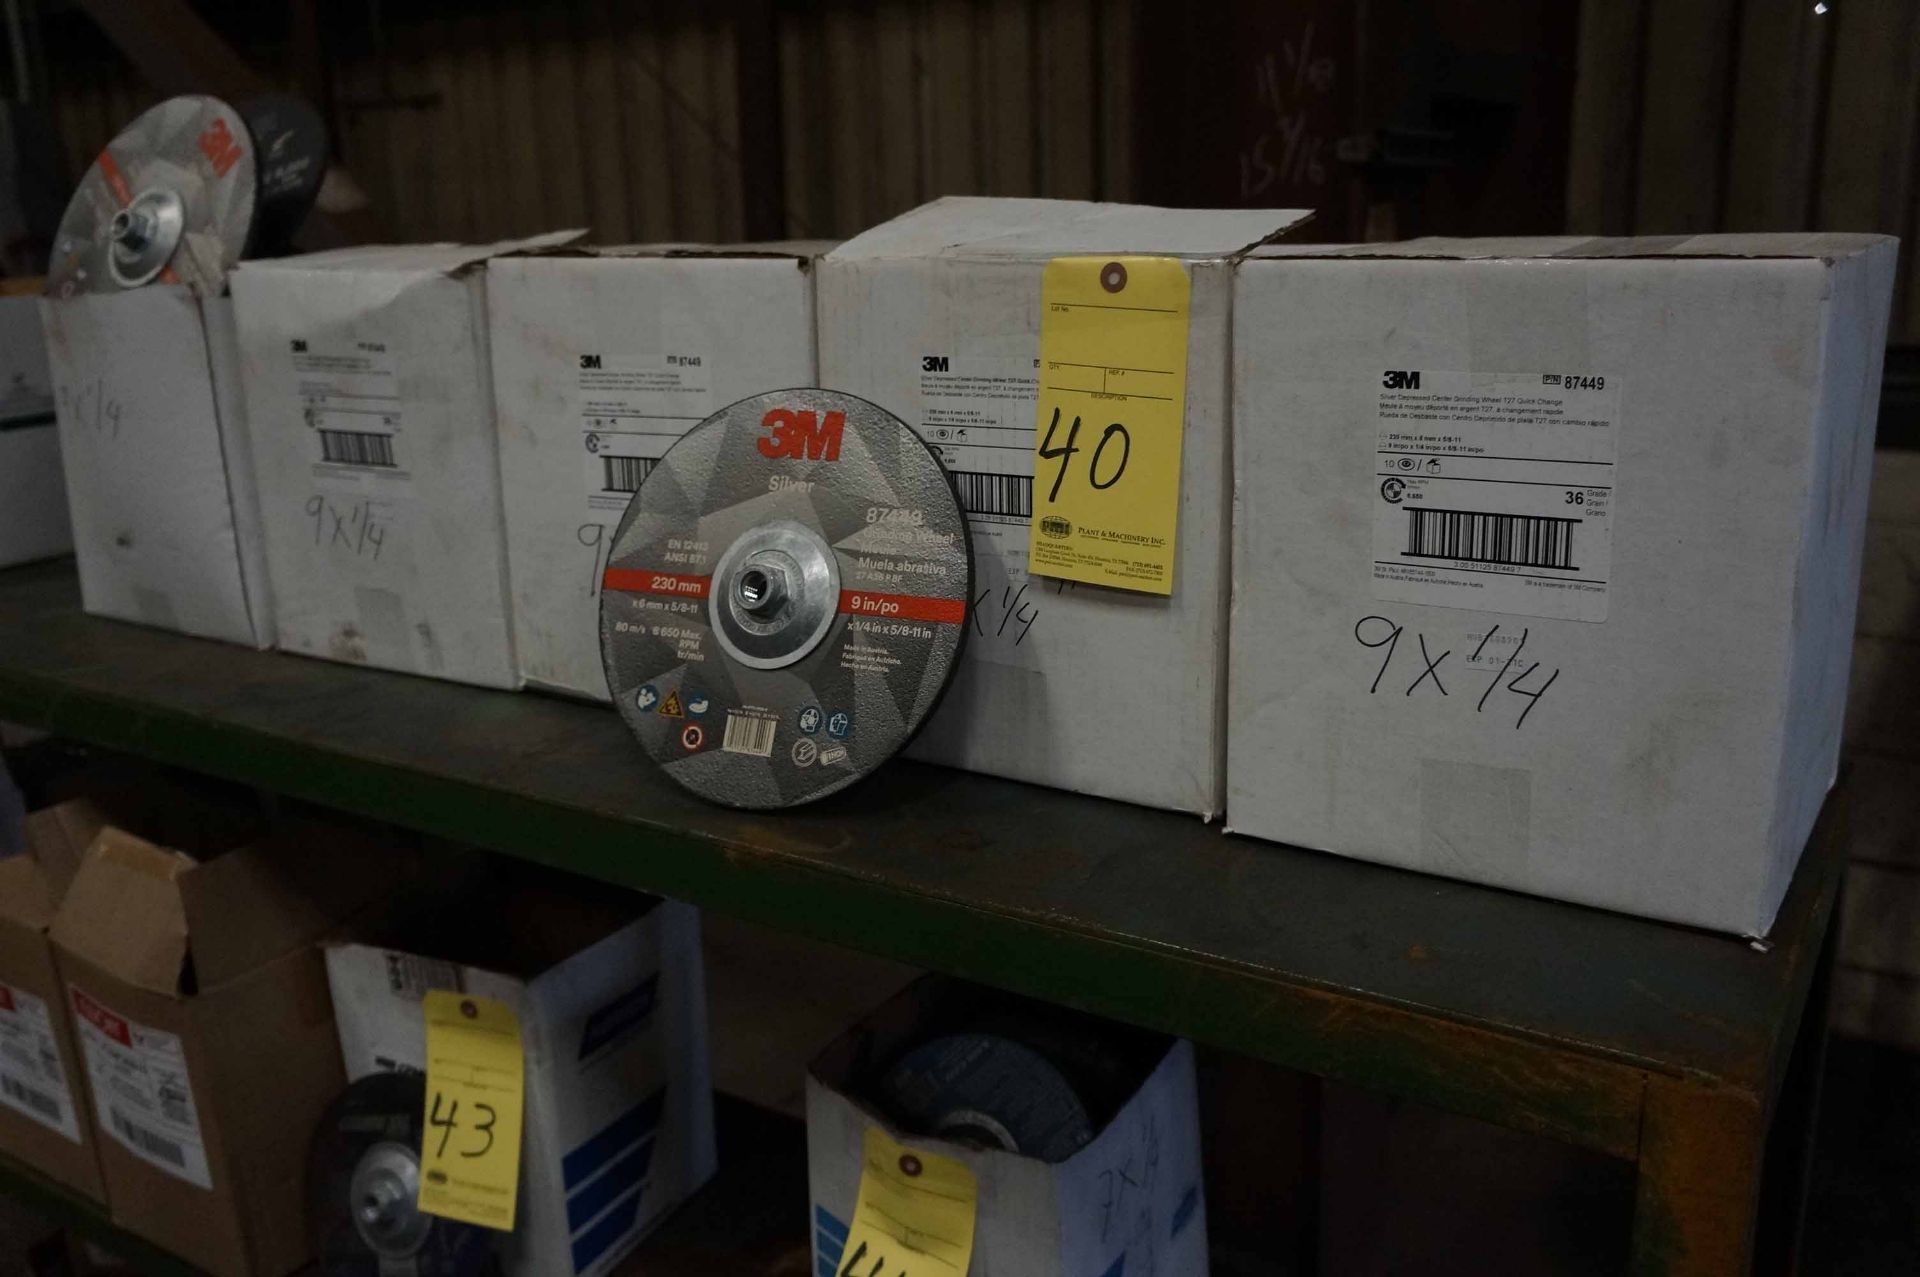 LOT OF GRINDING WHEELS (approx. 50), 3M MDL. 87449, 9" dia. x 1/4" (new)